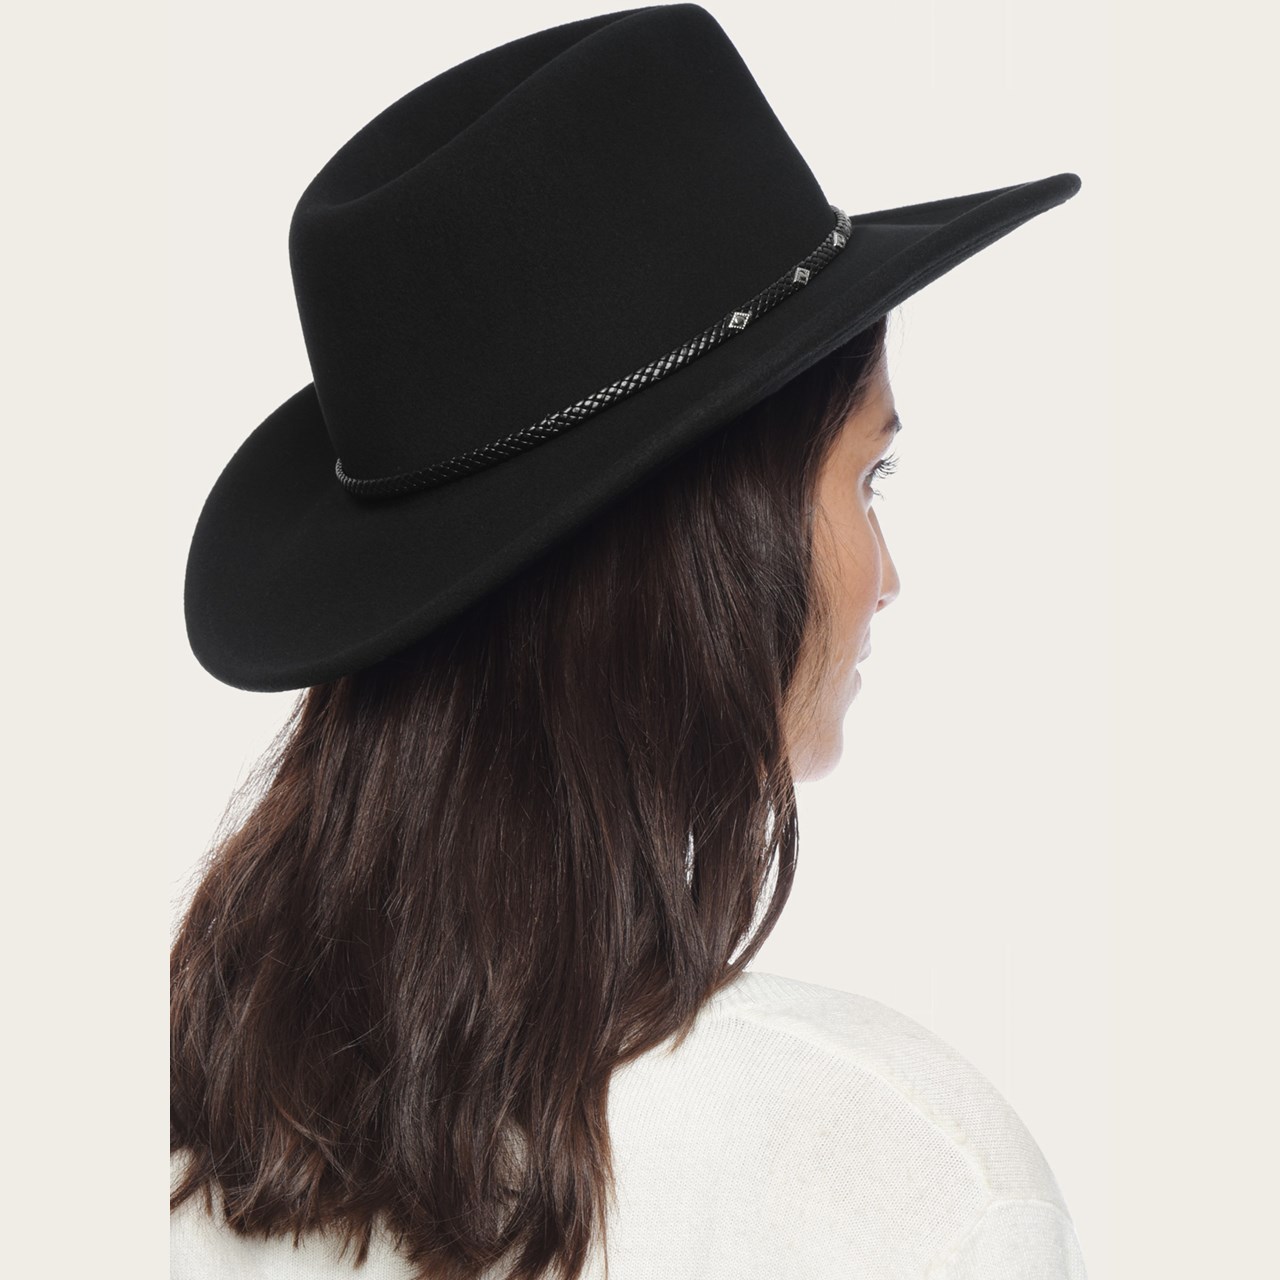 Reductress 4 Hats For Women With Thin Hair That Scream ‘i Just Love